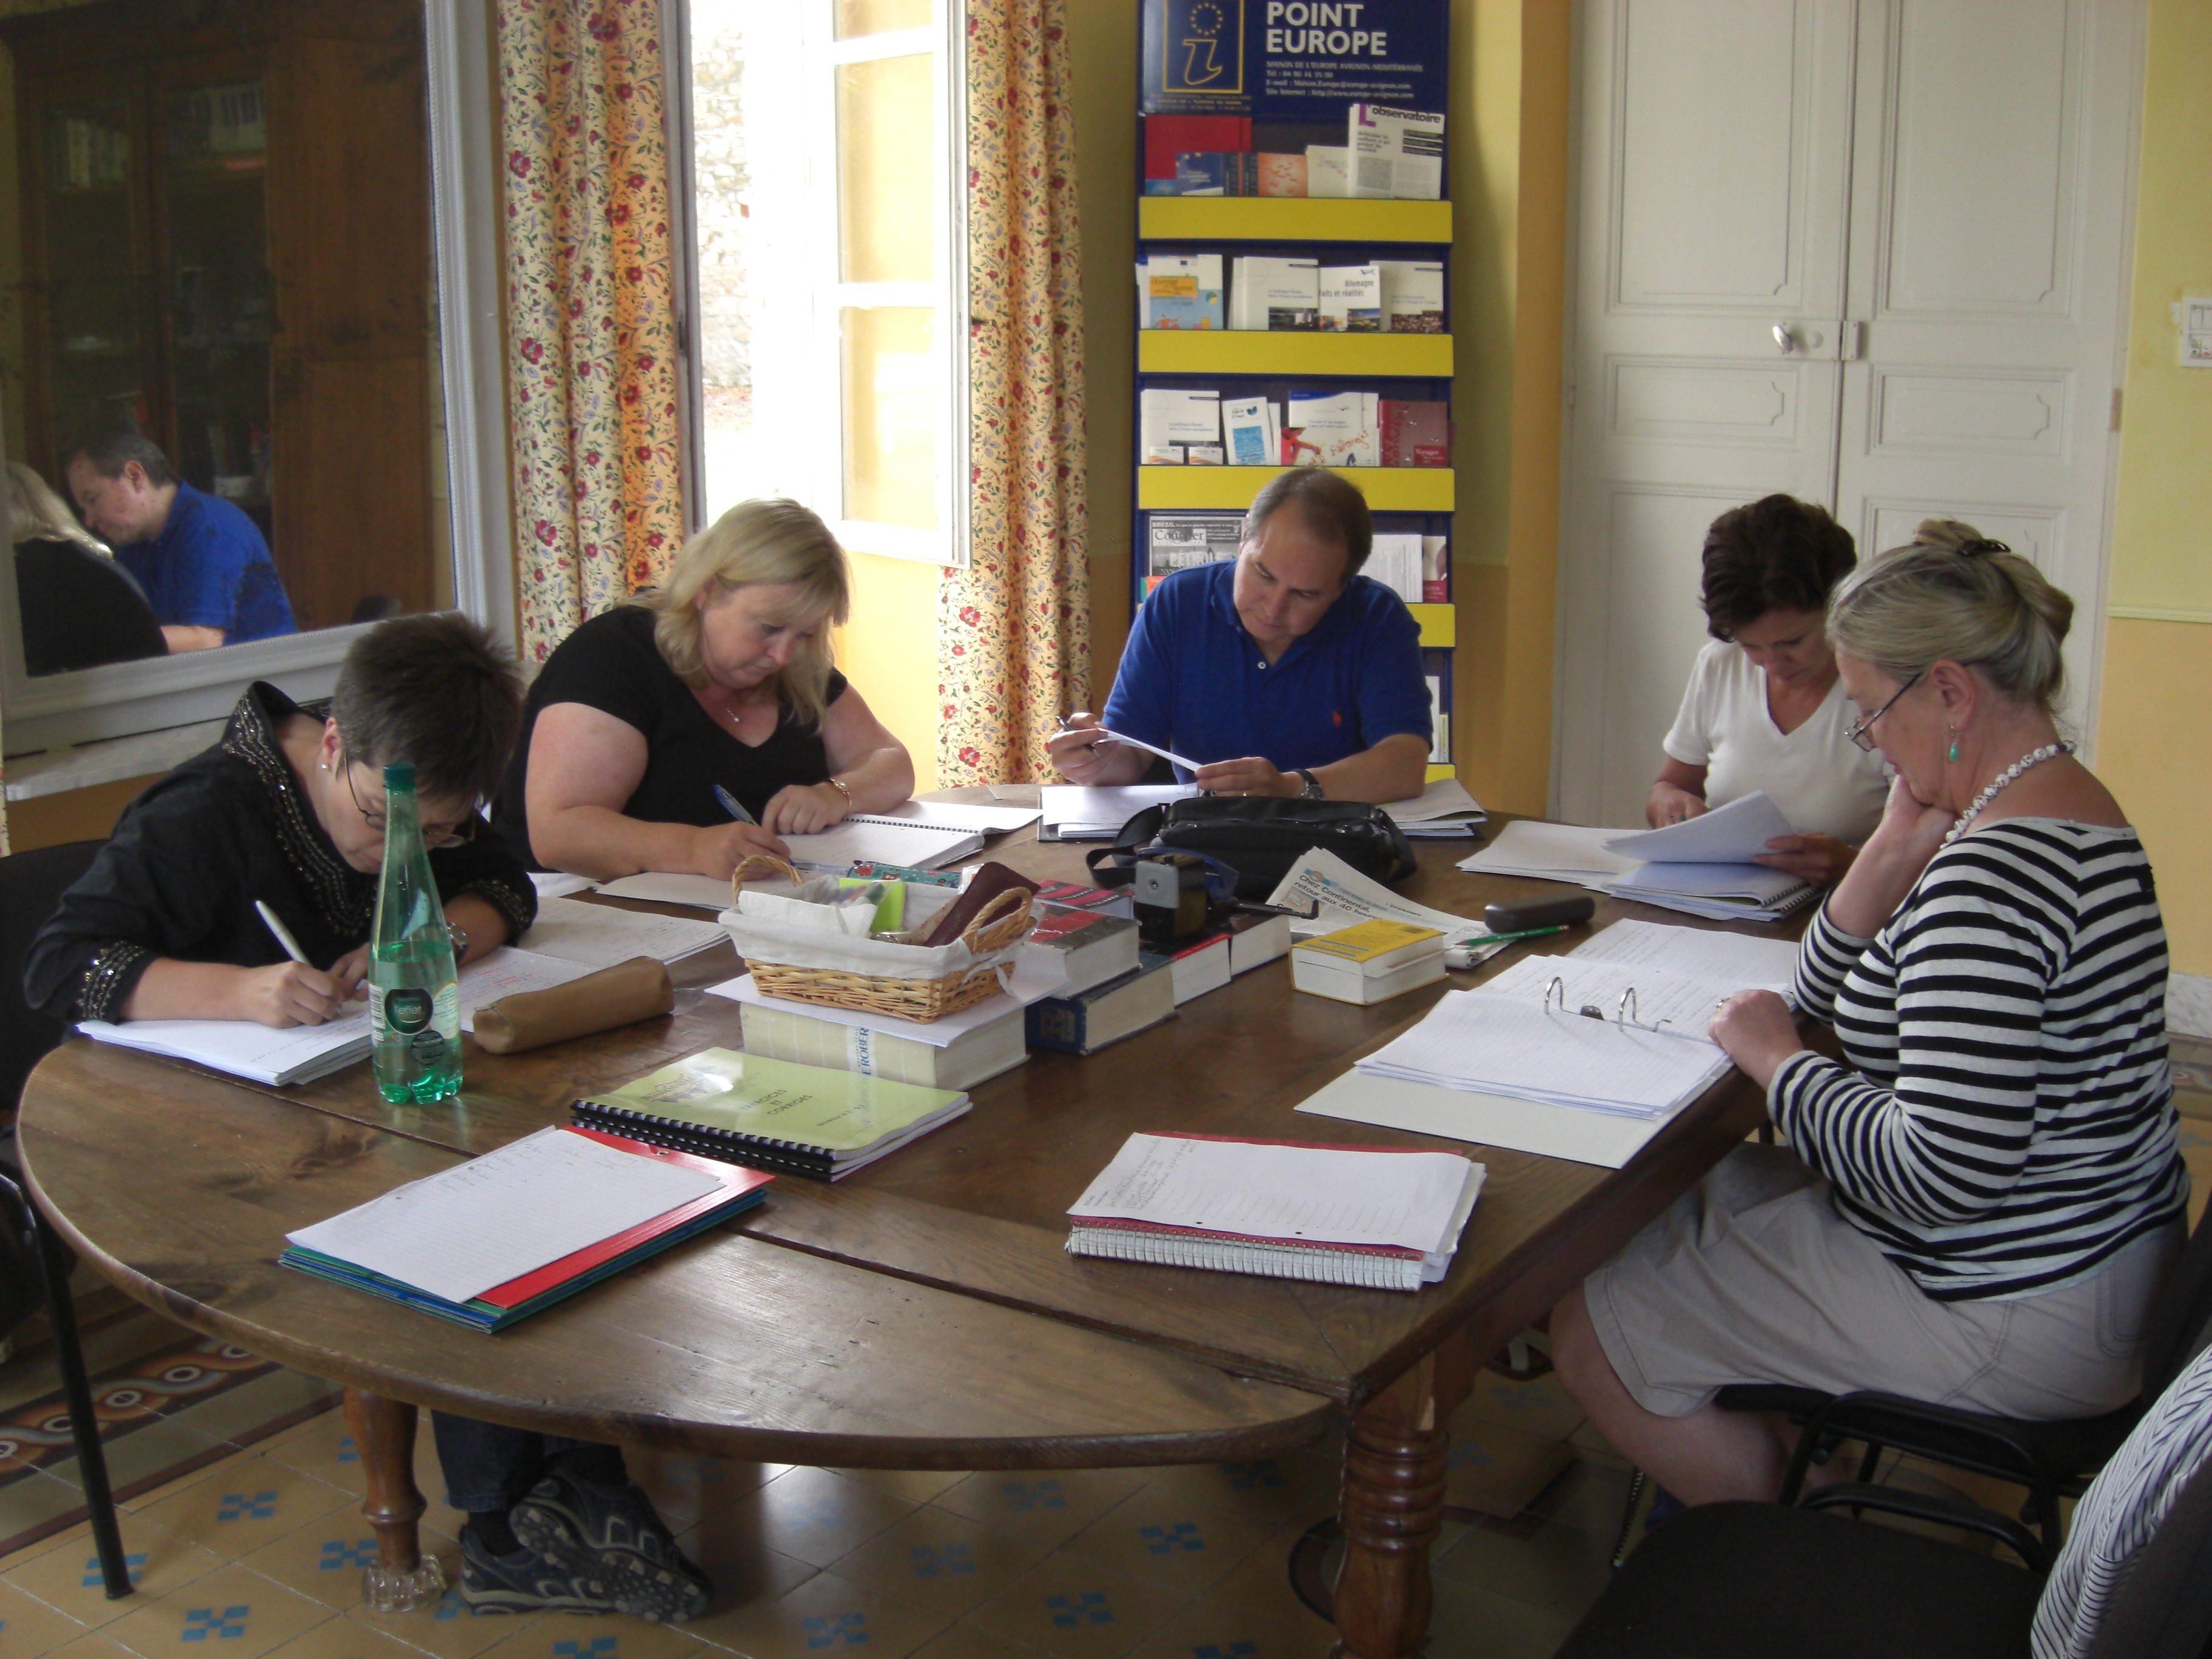 You learn French in small groups in our charming property in south of France